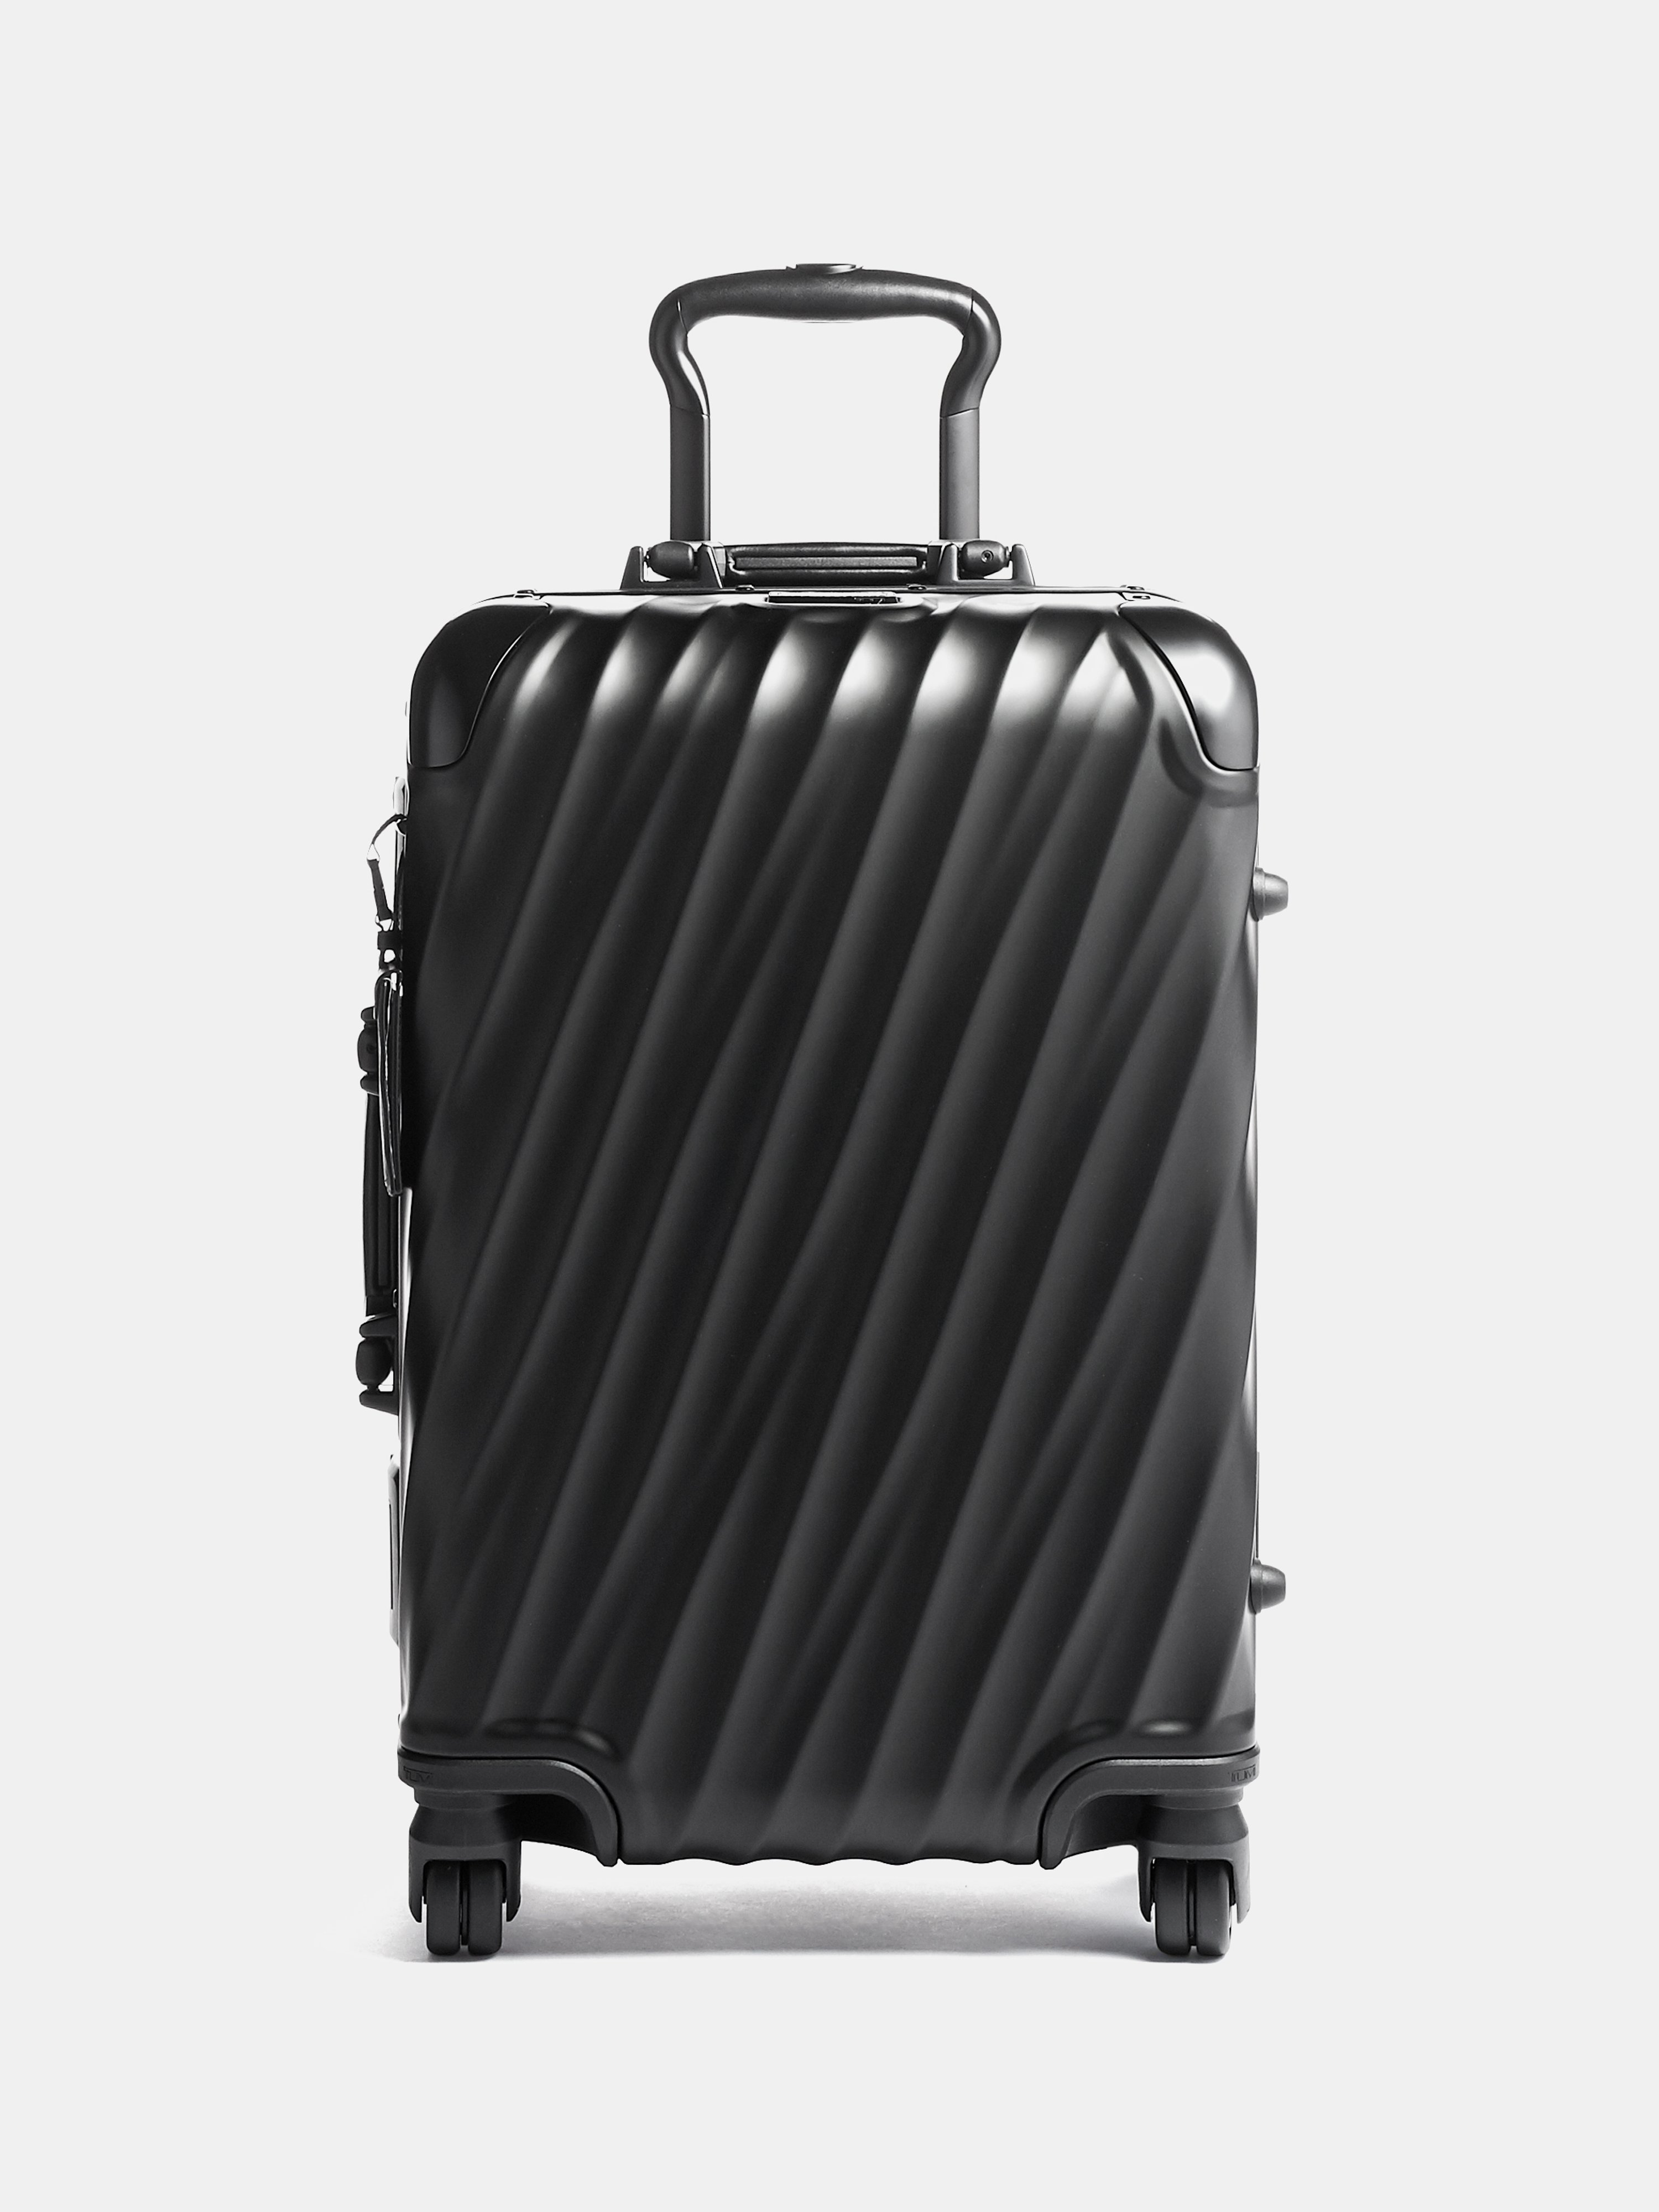 Tumi International Carry-on Suitcase In Matte Black